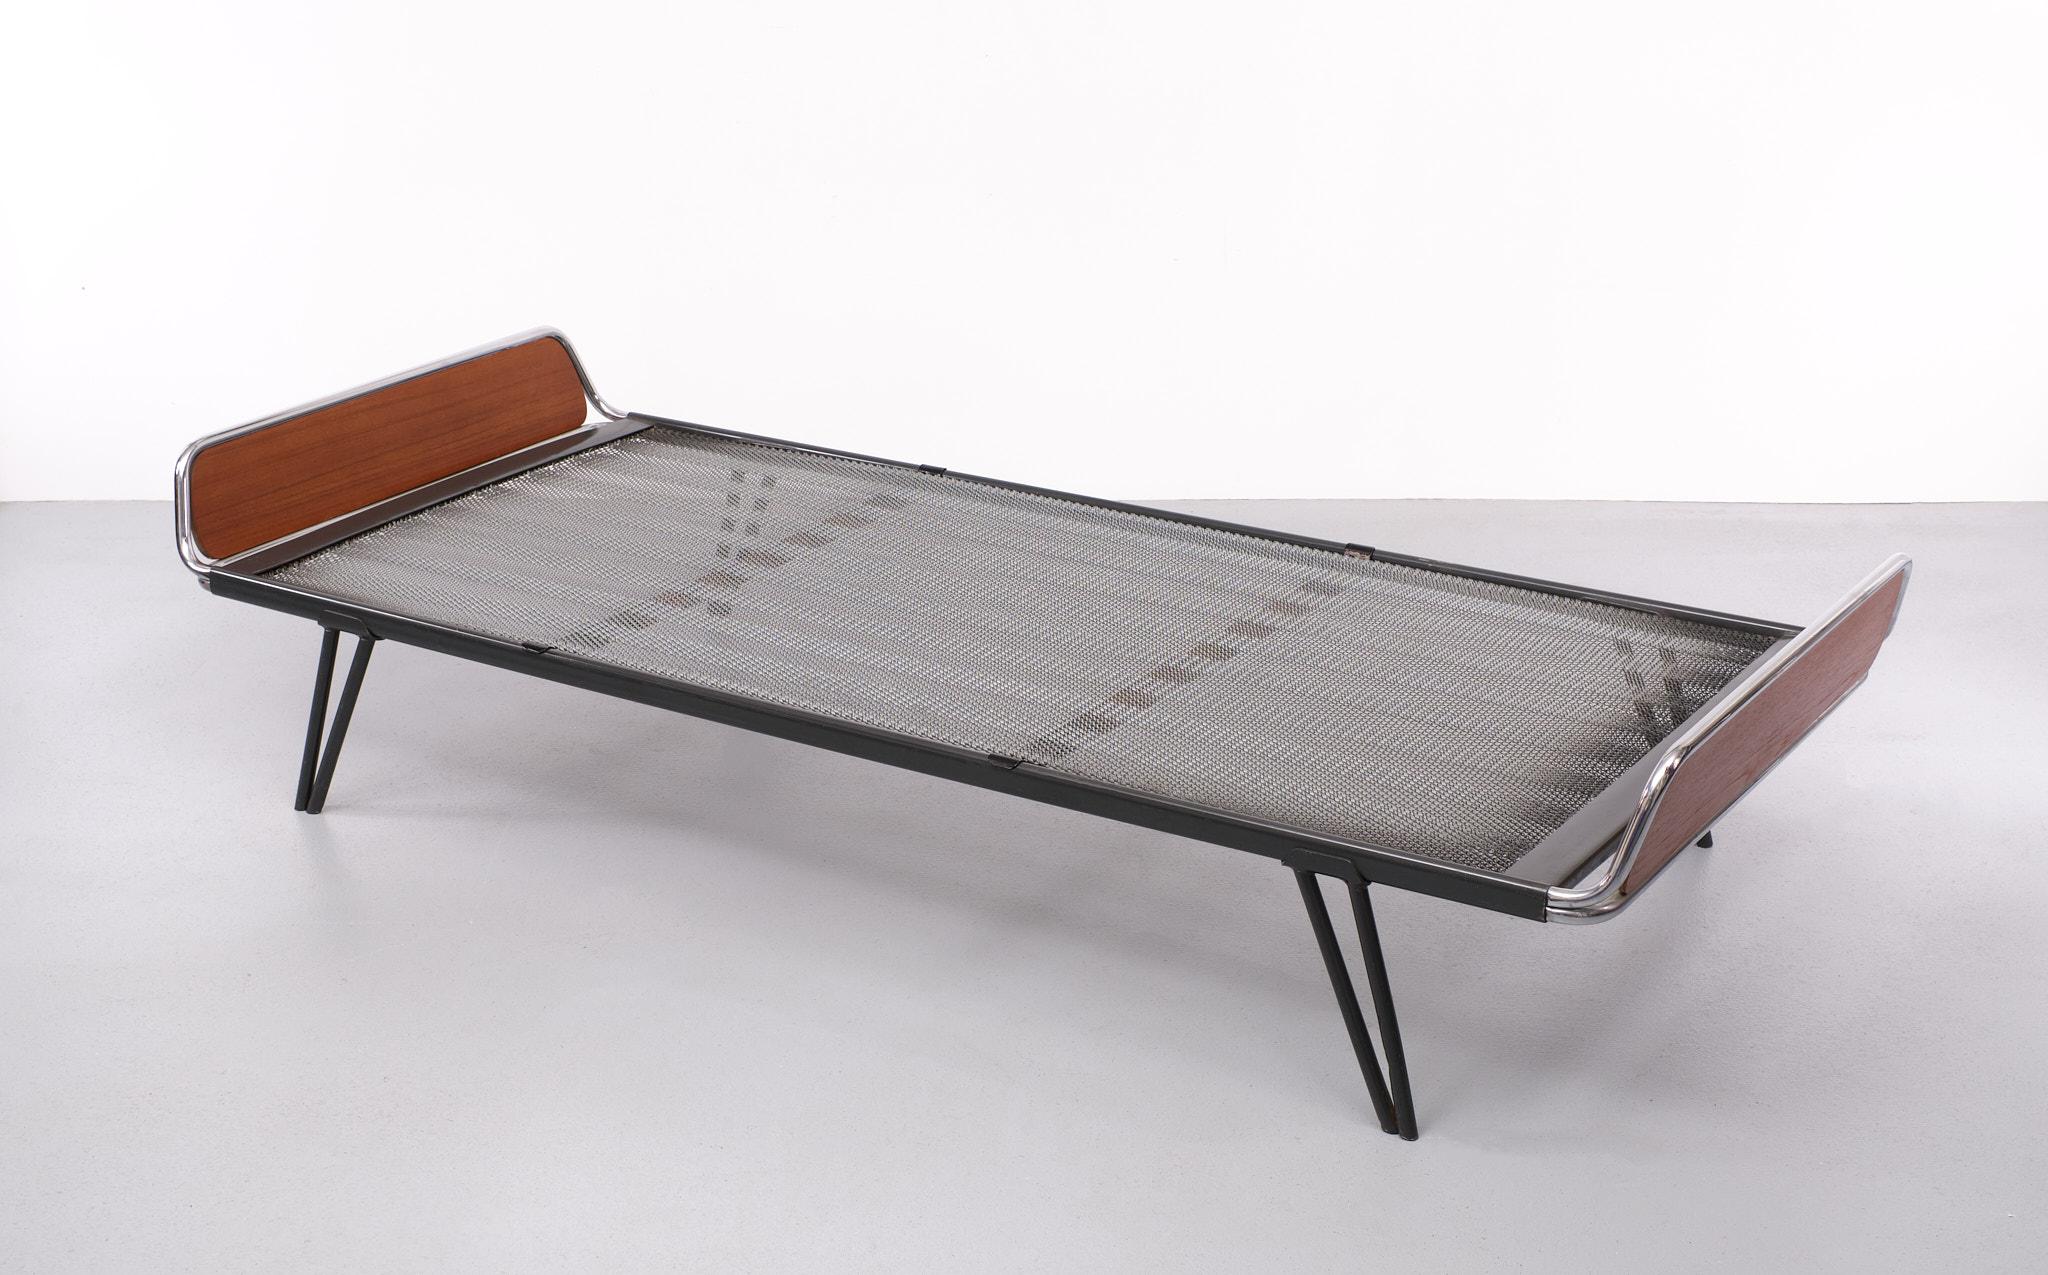 Very nice Day bed comes with its typical spa ace mattress .Teak with Chrome
head board  .Grey Metal Removable legs . Nice spare bed or Daybed  

Please don't hesitate to reach out for alternative shipping quote